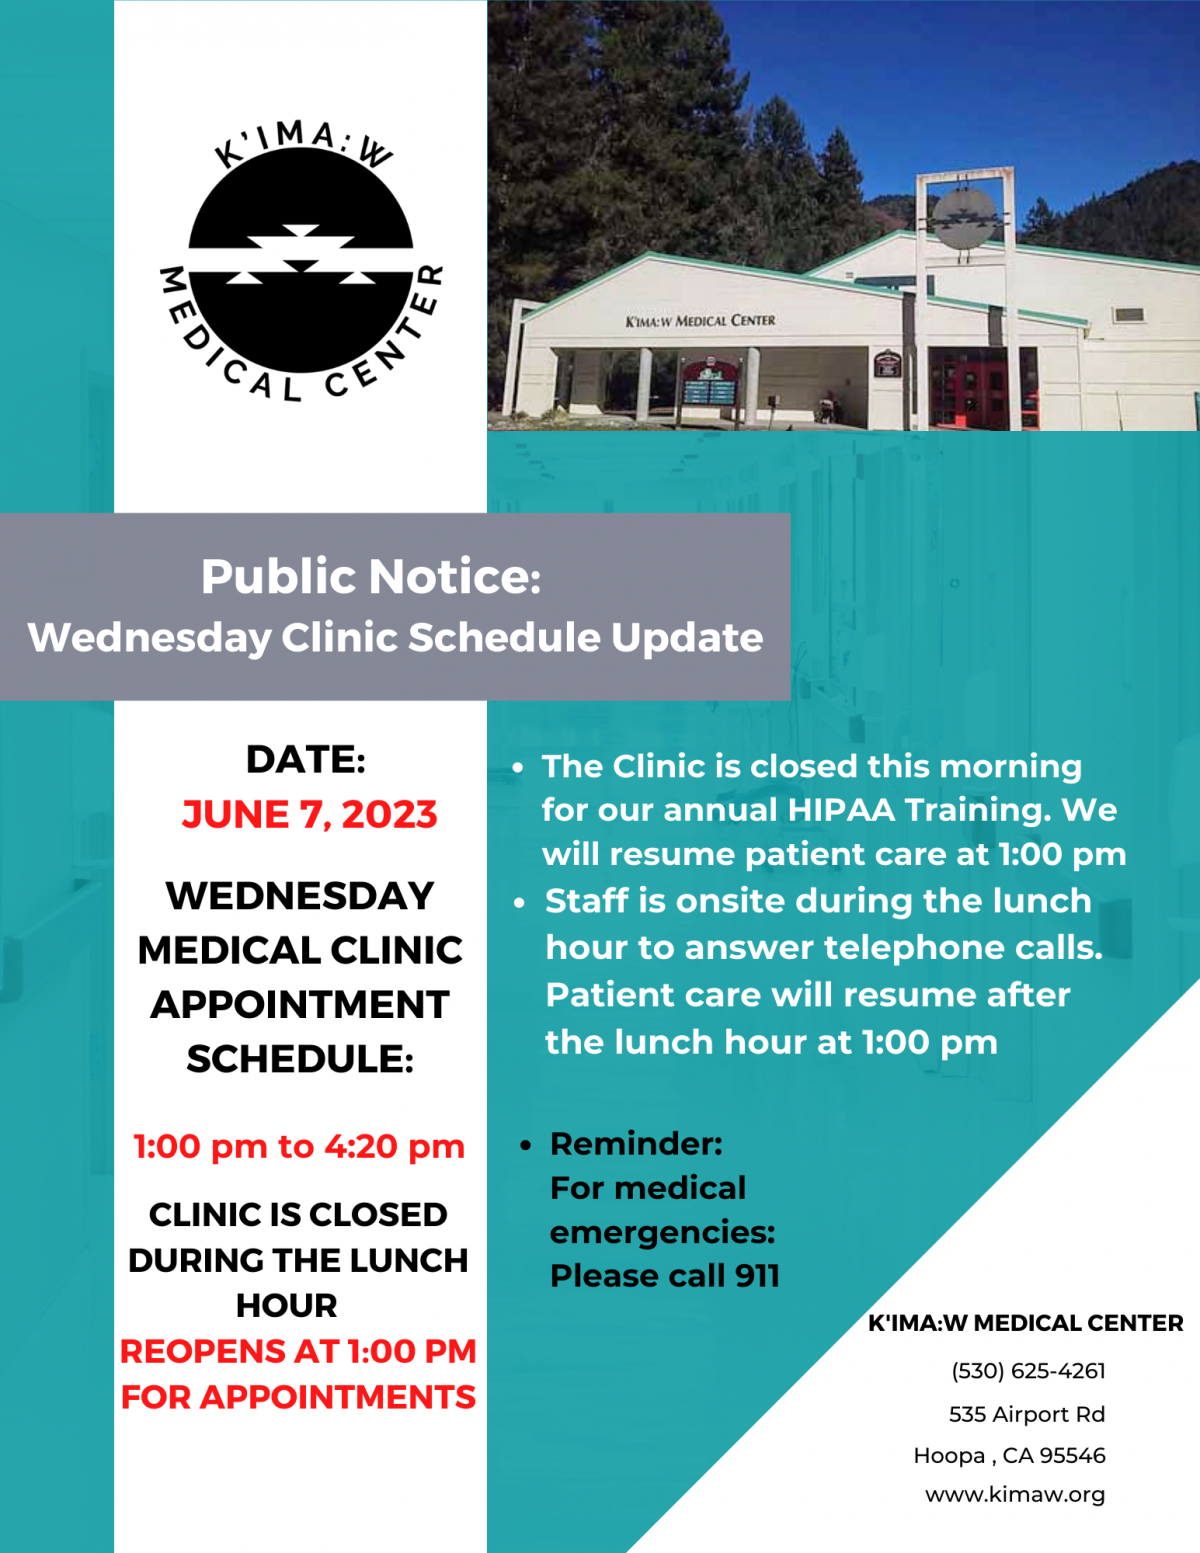 KMC Wednesday Clinic Schedule Update for June 7, 2023